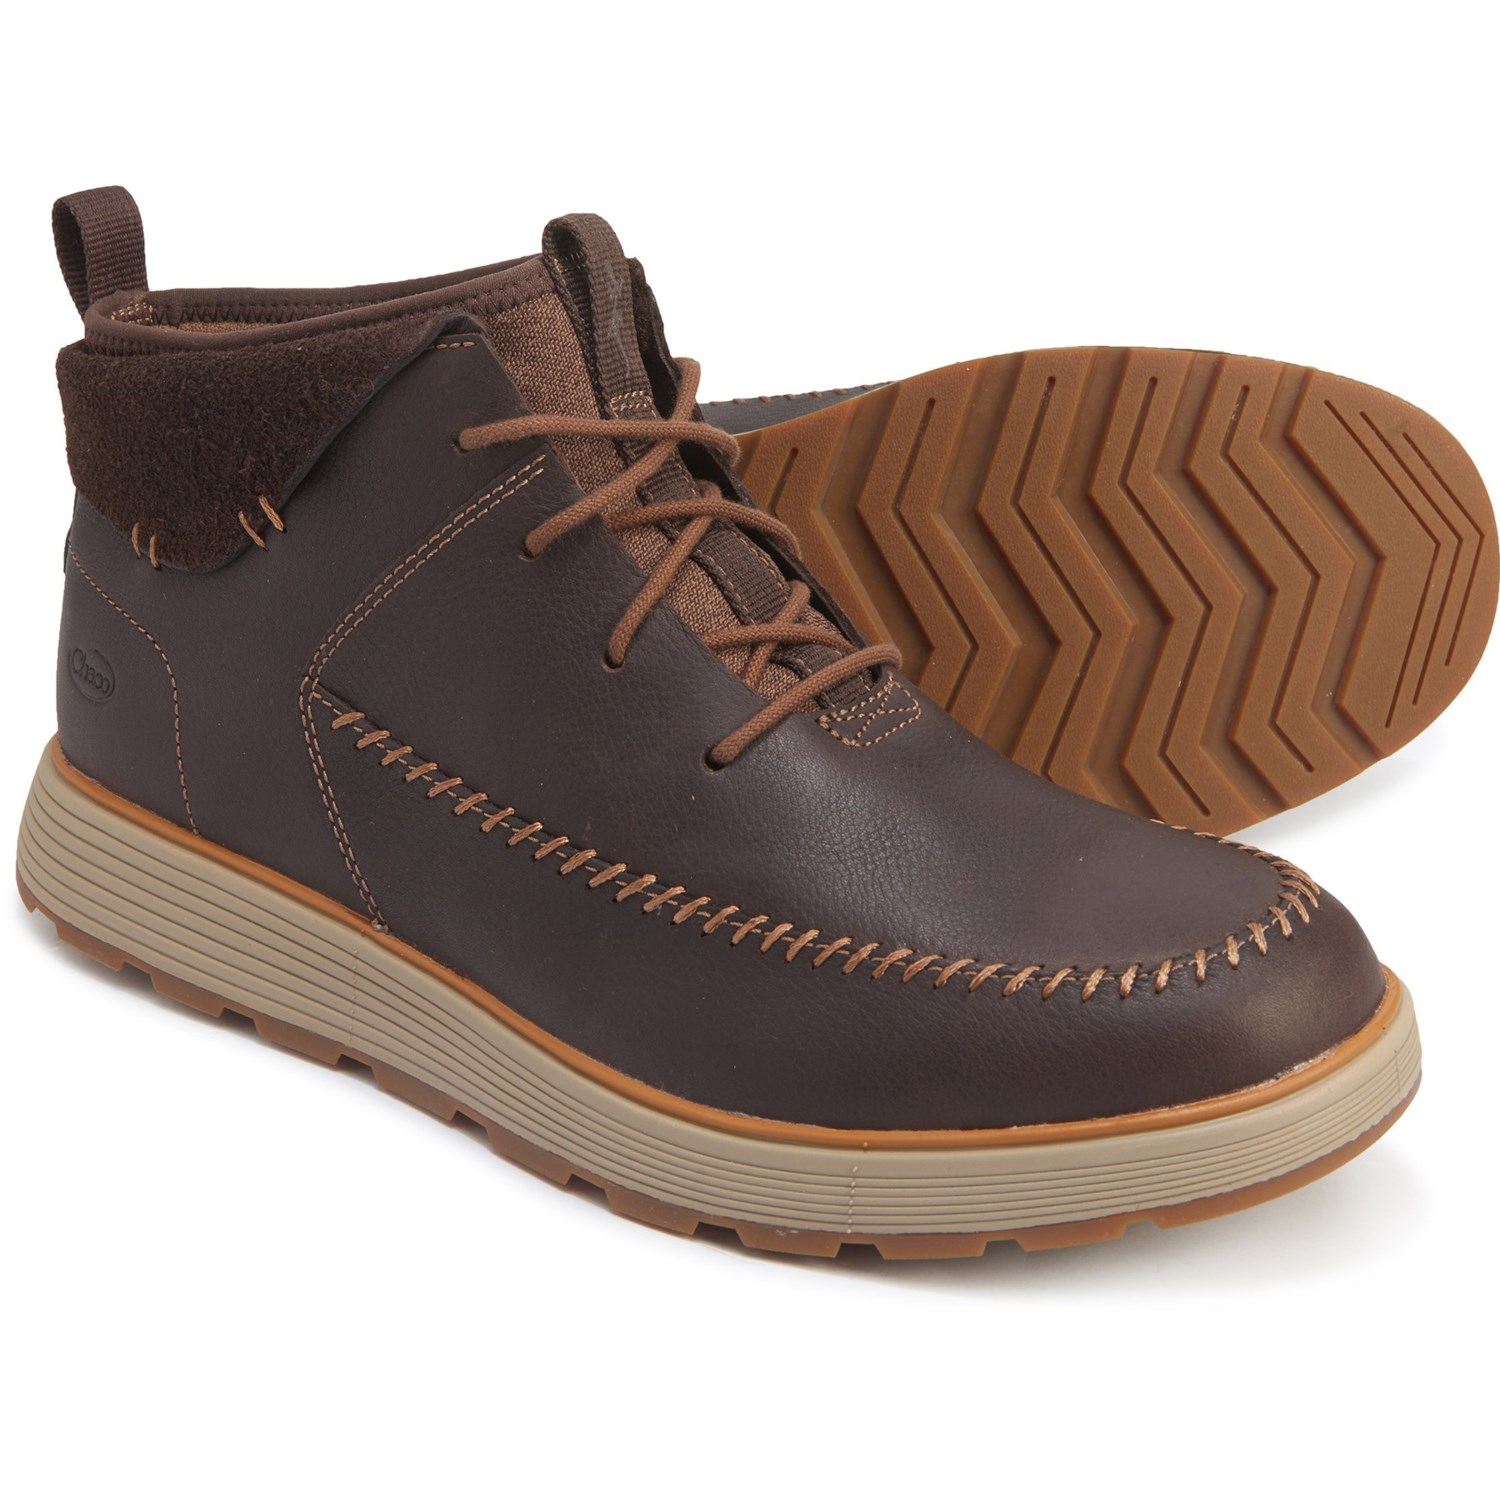 Chaco Dixon Mid Boots (For Men) - Save 46%